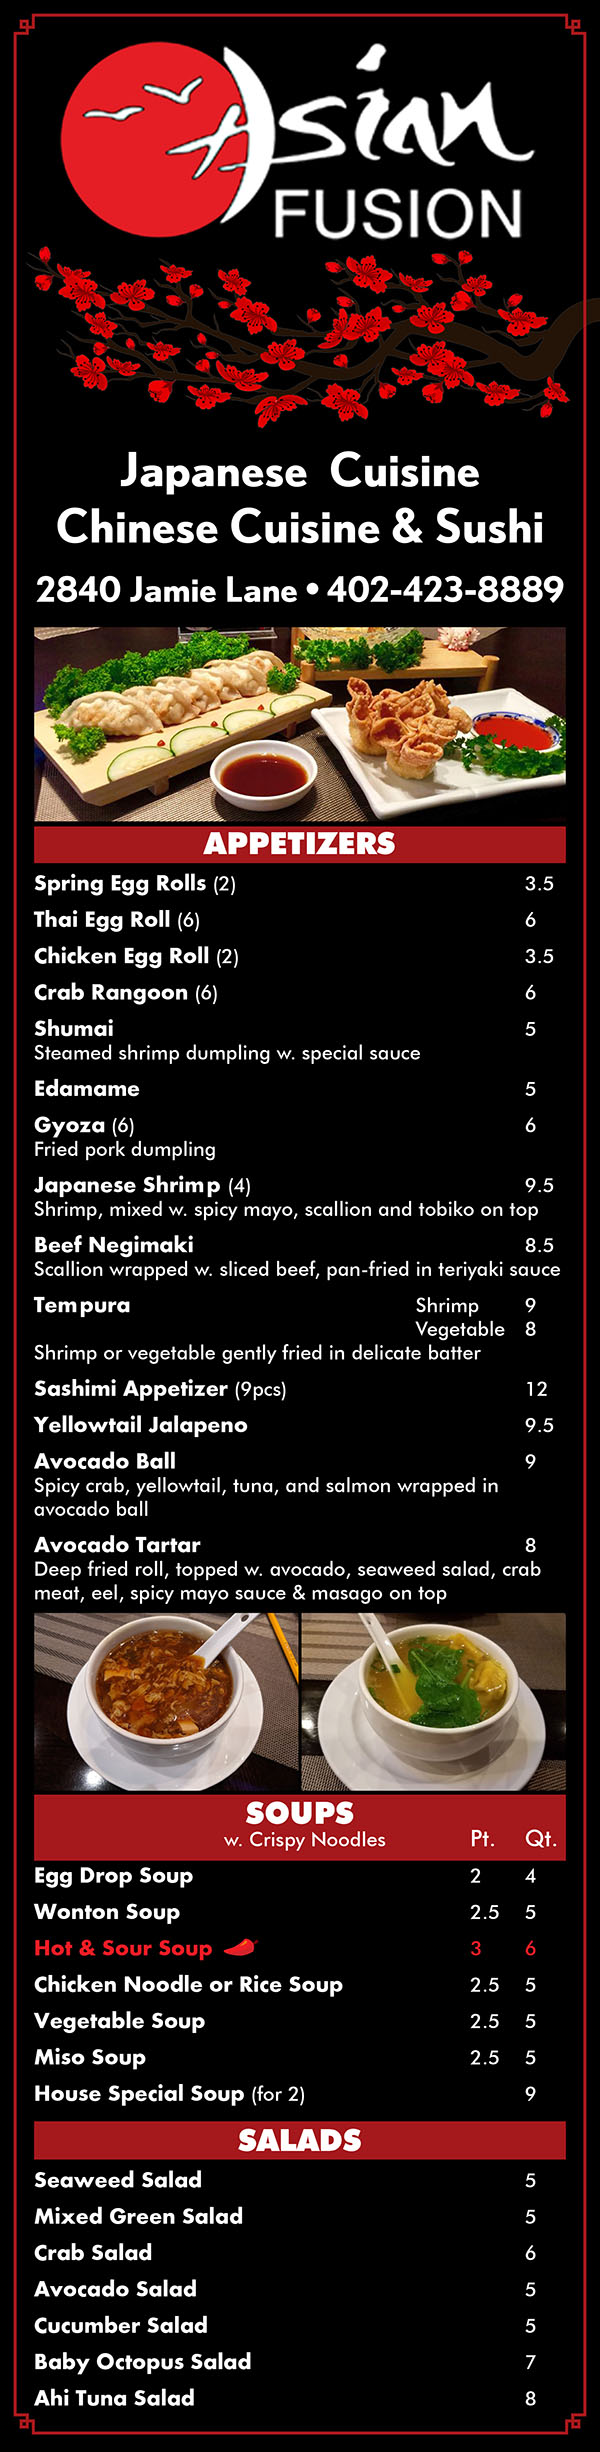 Asian Fusion Restaurant Menu Lincoln NE - Page 1
Asian Fusion
Chinese & Sushi 
Dine in & Take Out 
www.AsianFusionLNK.com 
402-423-8889 
2840 Jamie Lane, Lincoln, NE 68516 
Open 7 days a week: 
Mon-Thurs.11 00am-10 00pm 
Friday & Saturday.11 00am-10 30pm 
Sunday 12 00noon-10 00pm 
ALL YOU CAN EAT - SUSHI
Tuesday: Lunch (11:OOam-3:OOpm) 
Dinner (3:00am-10:00pm) 
Sunday: All Day Some Restrictions May Apply 